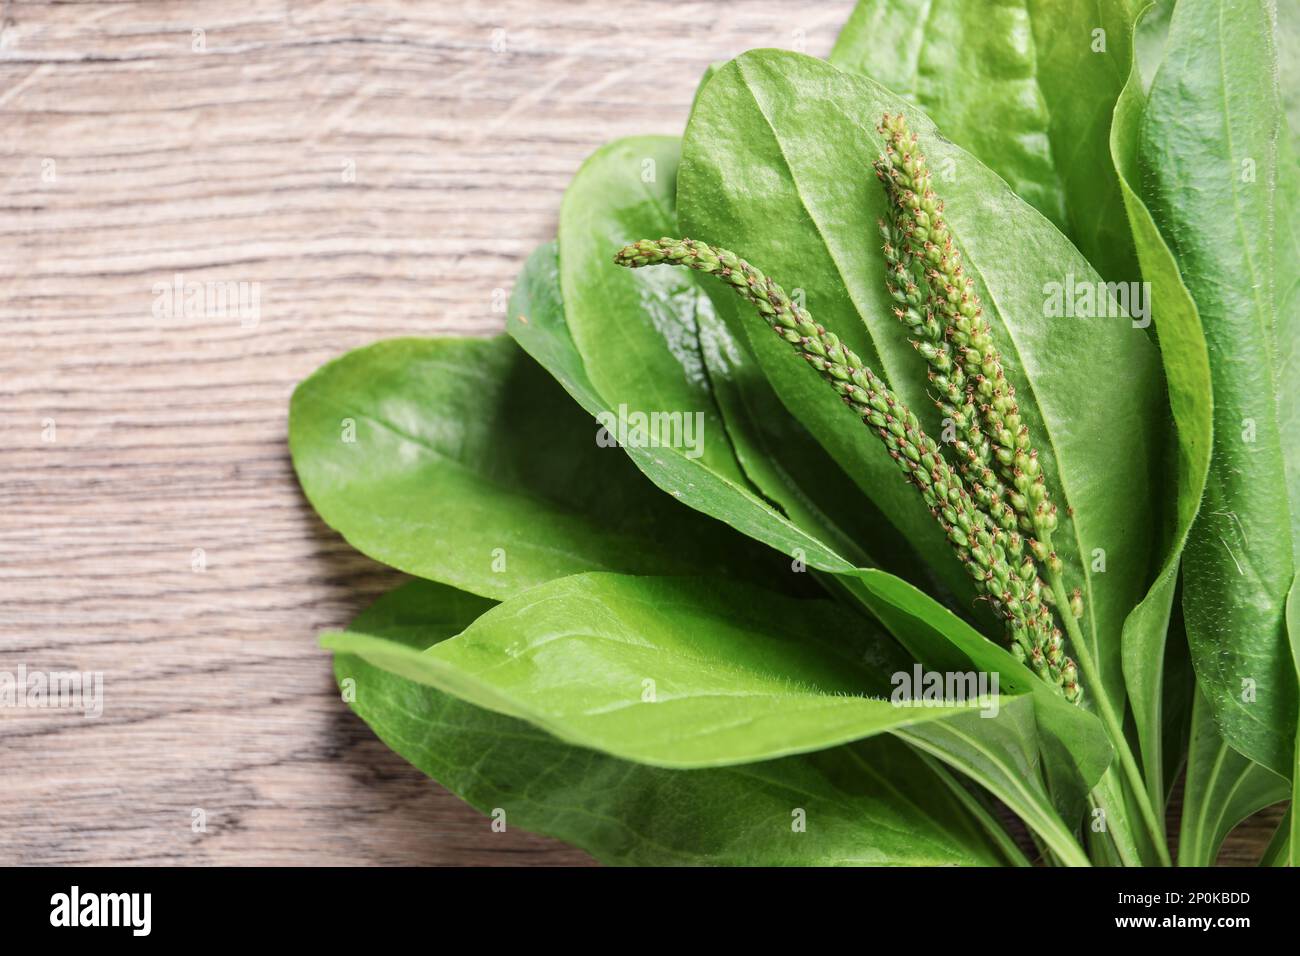 Green broadleaf plantain leaves on wooden table, closeup Stock Photo